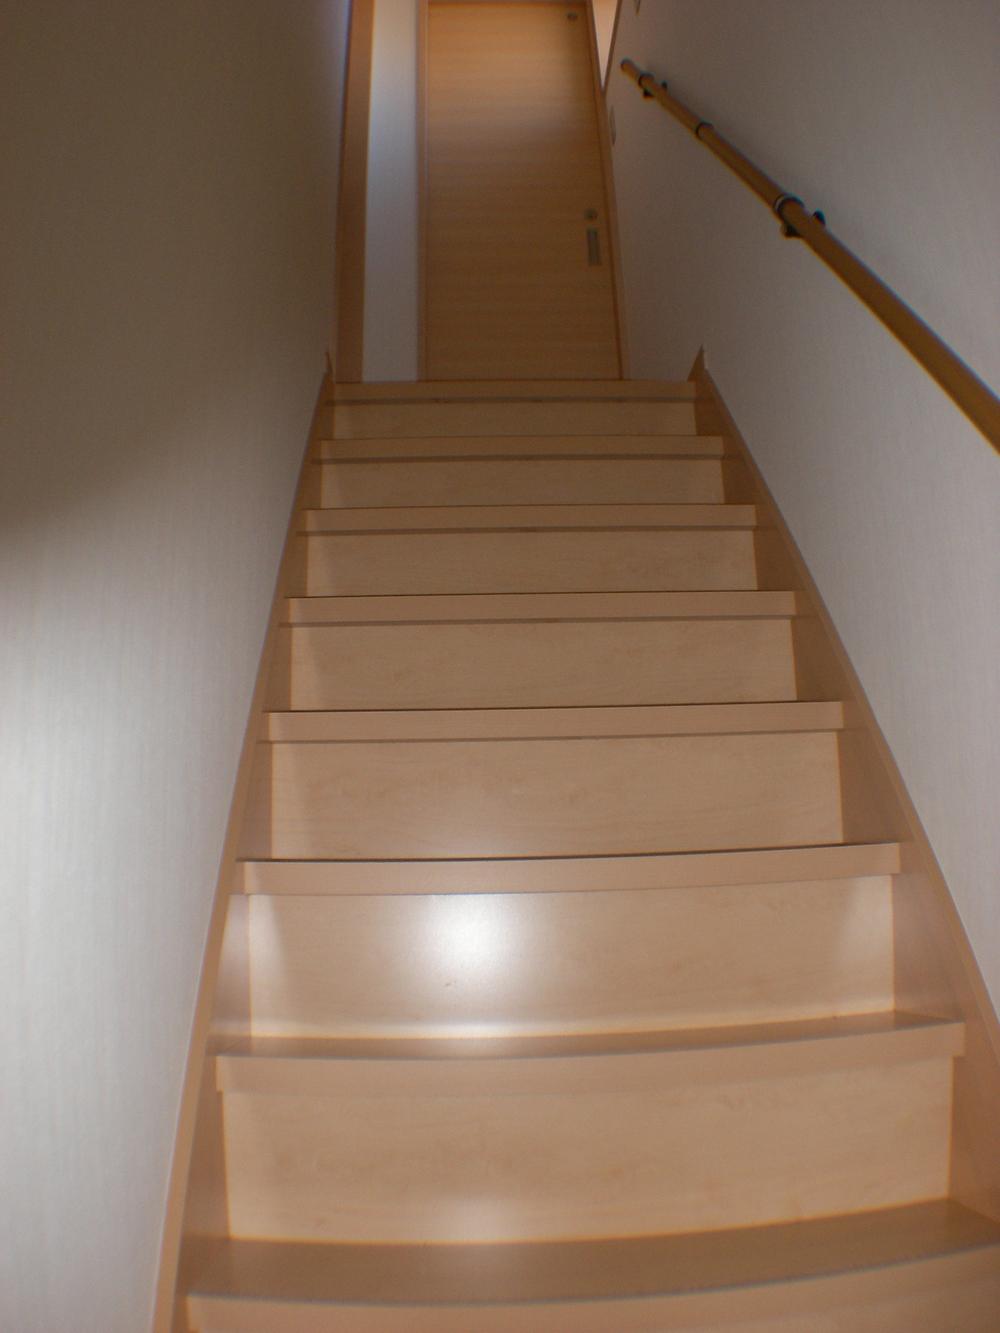 Other introspection. You go up and relax stairs color can be chosen.